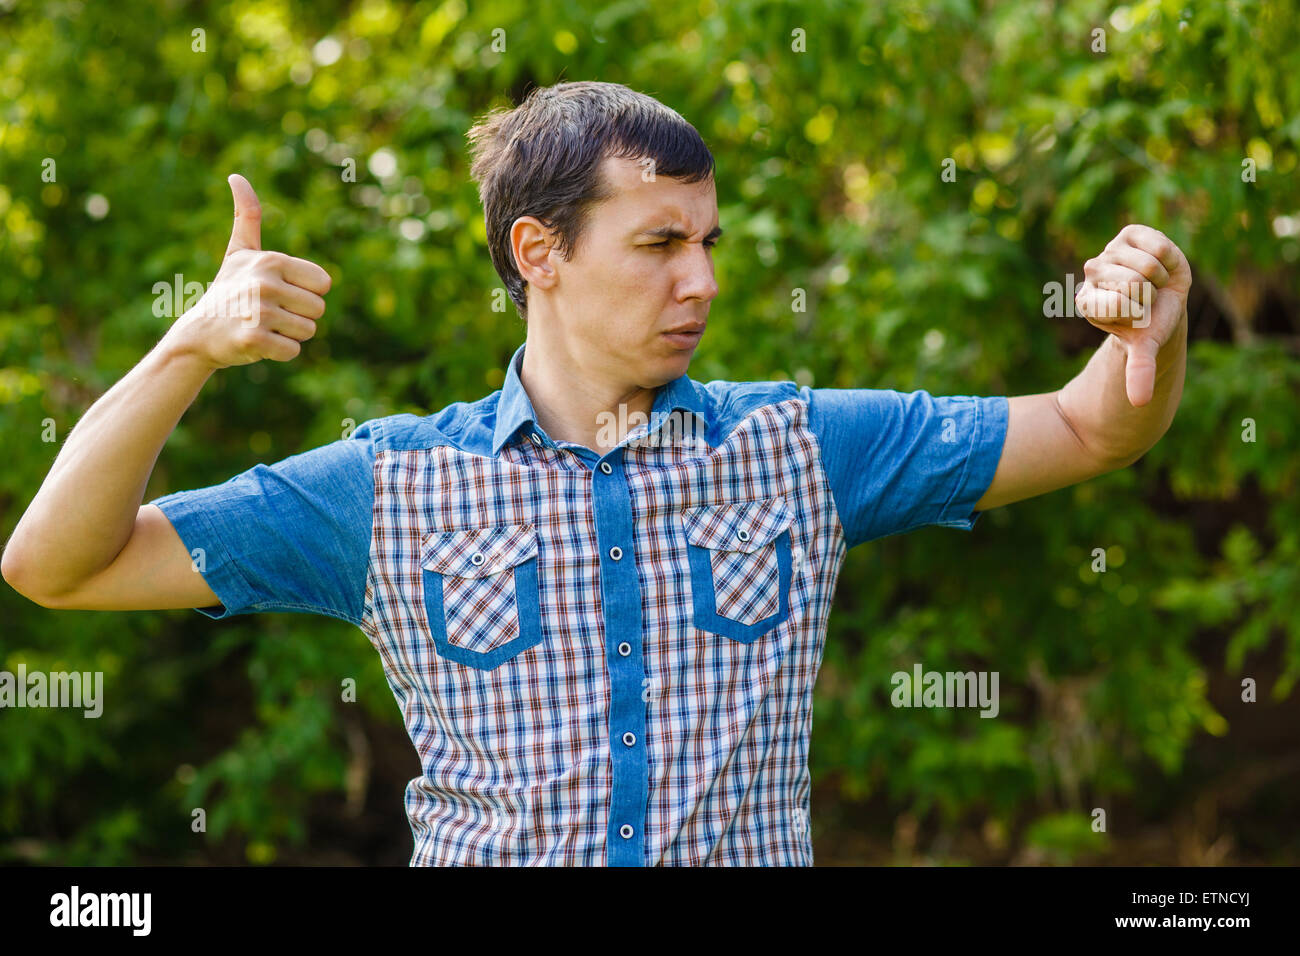 Man outdoors thumbs up thumbs down on a green background leaves Stock Photo